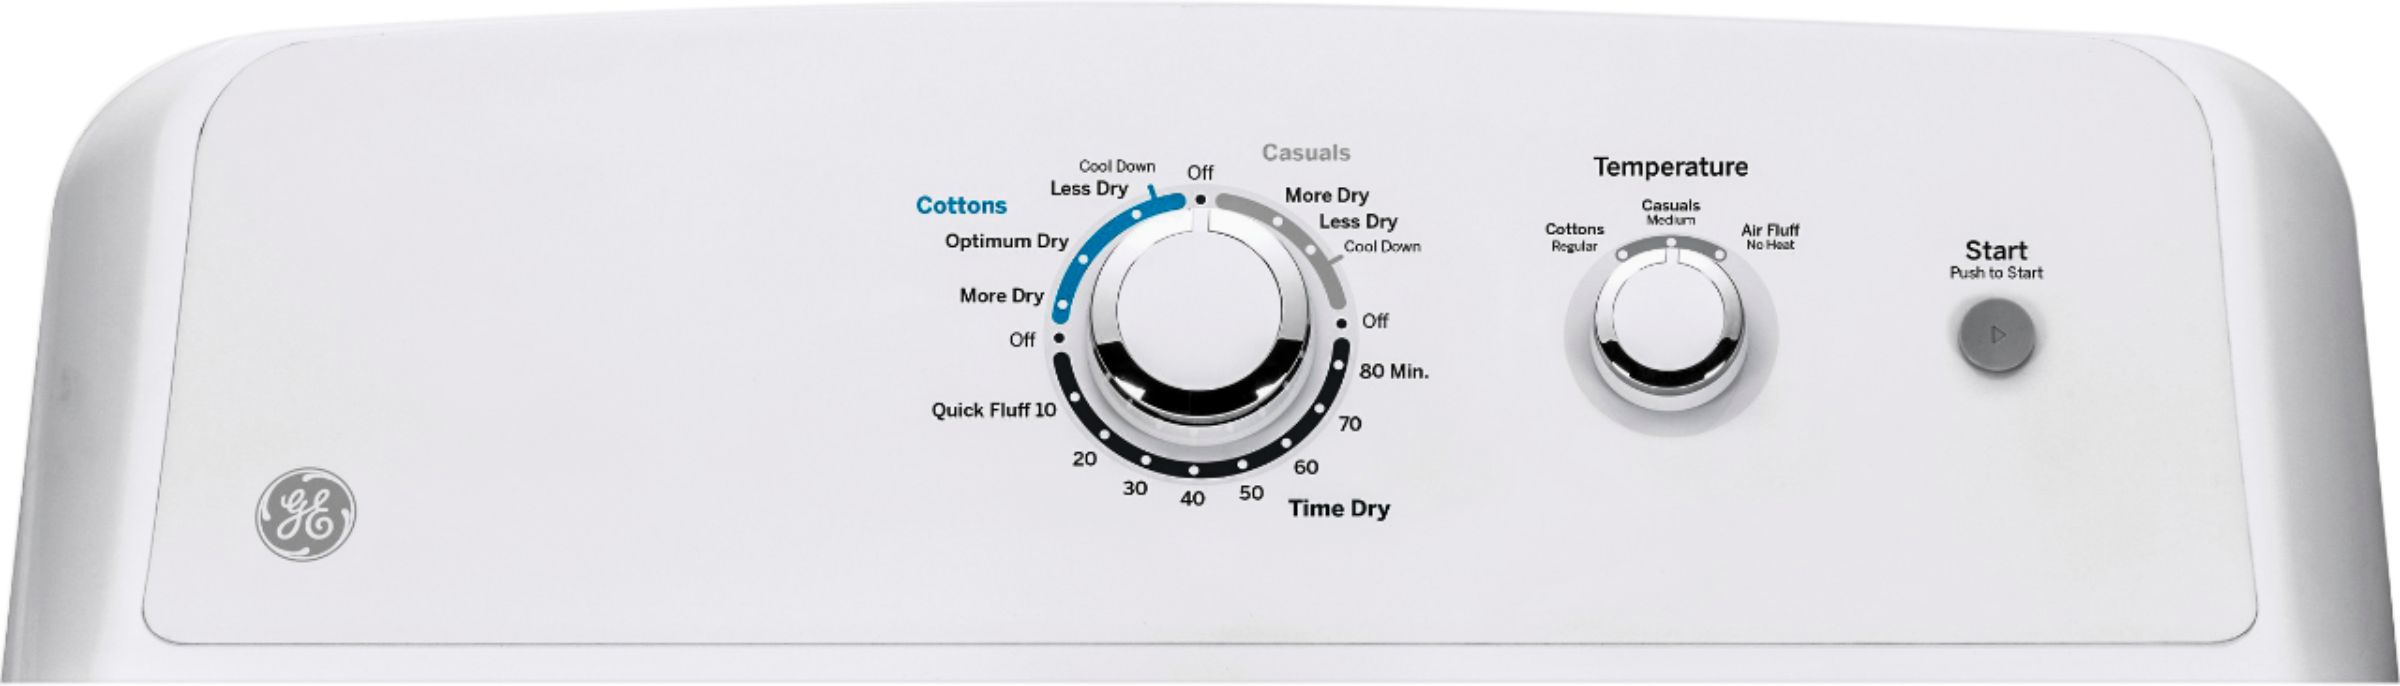 Angle View: GE - 7.2 Cu. Ft. Electric Dryer - White